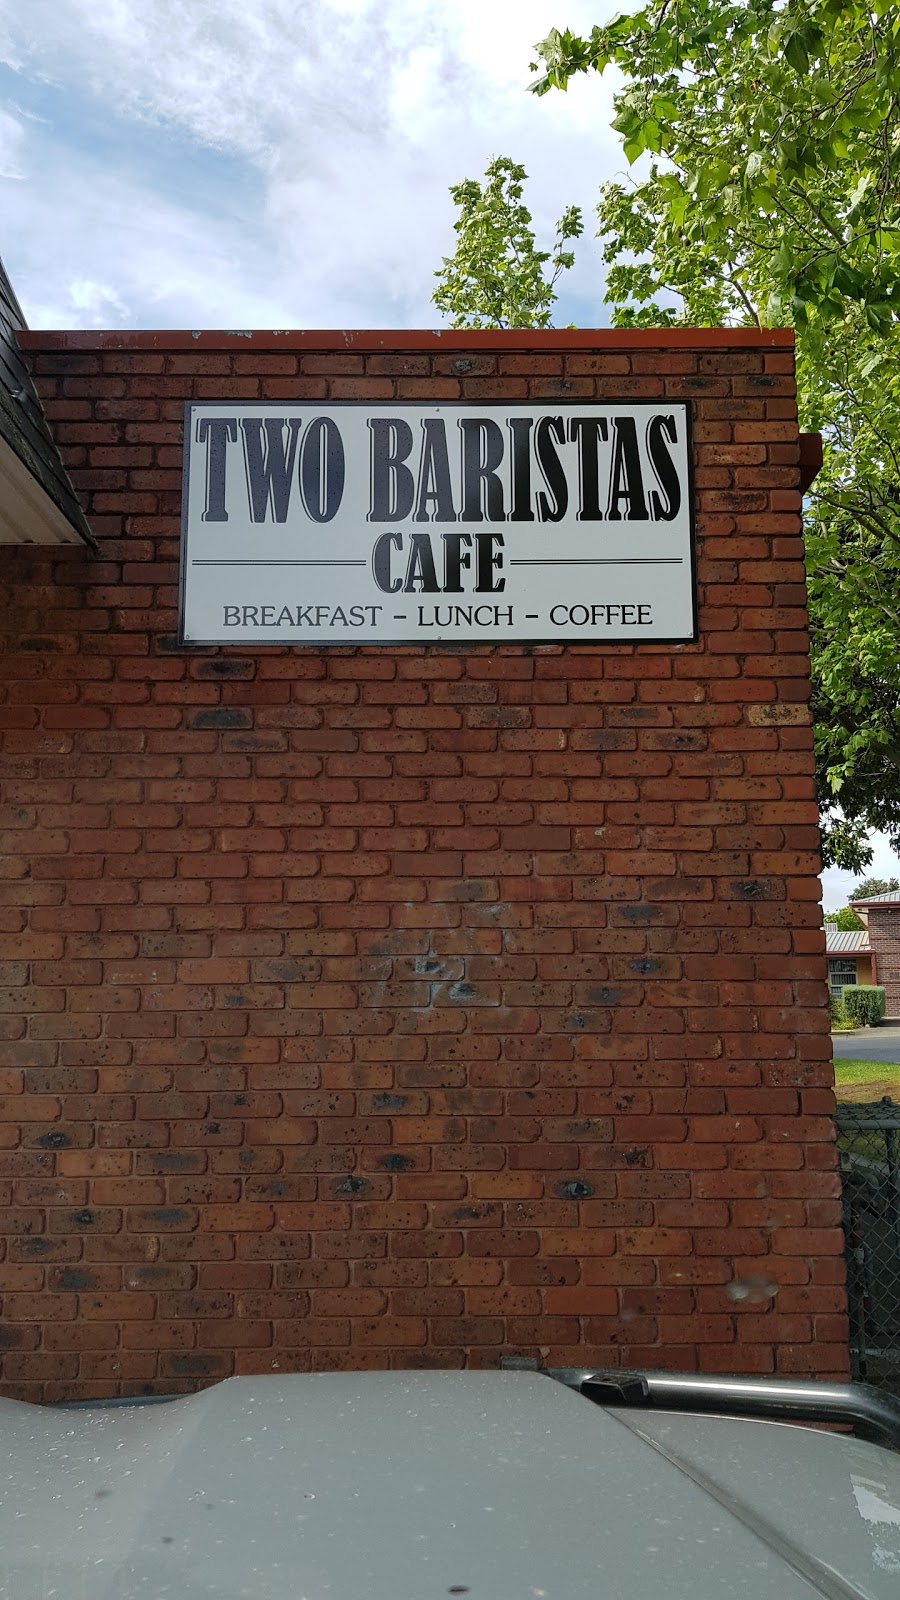 Two Baristas Cafe | restaurant | 7/101 Station St, Ferntree Gully VIC 3156, Australia | 0468935275 OR +61 468 935 275